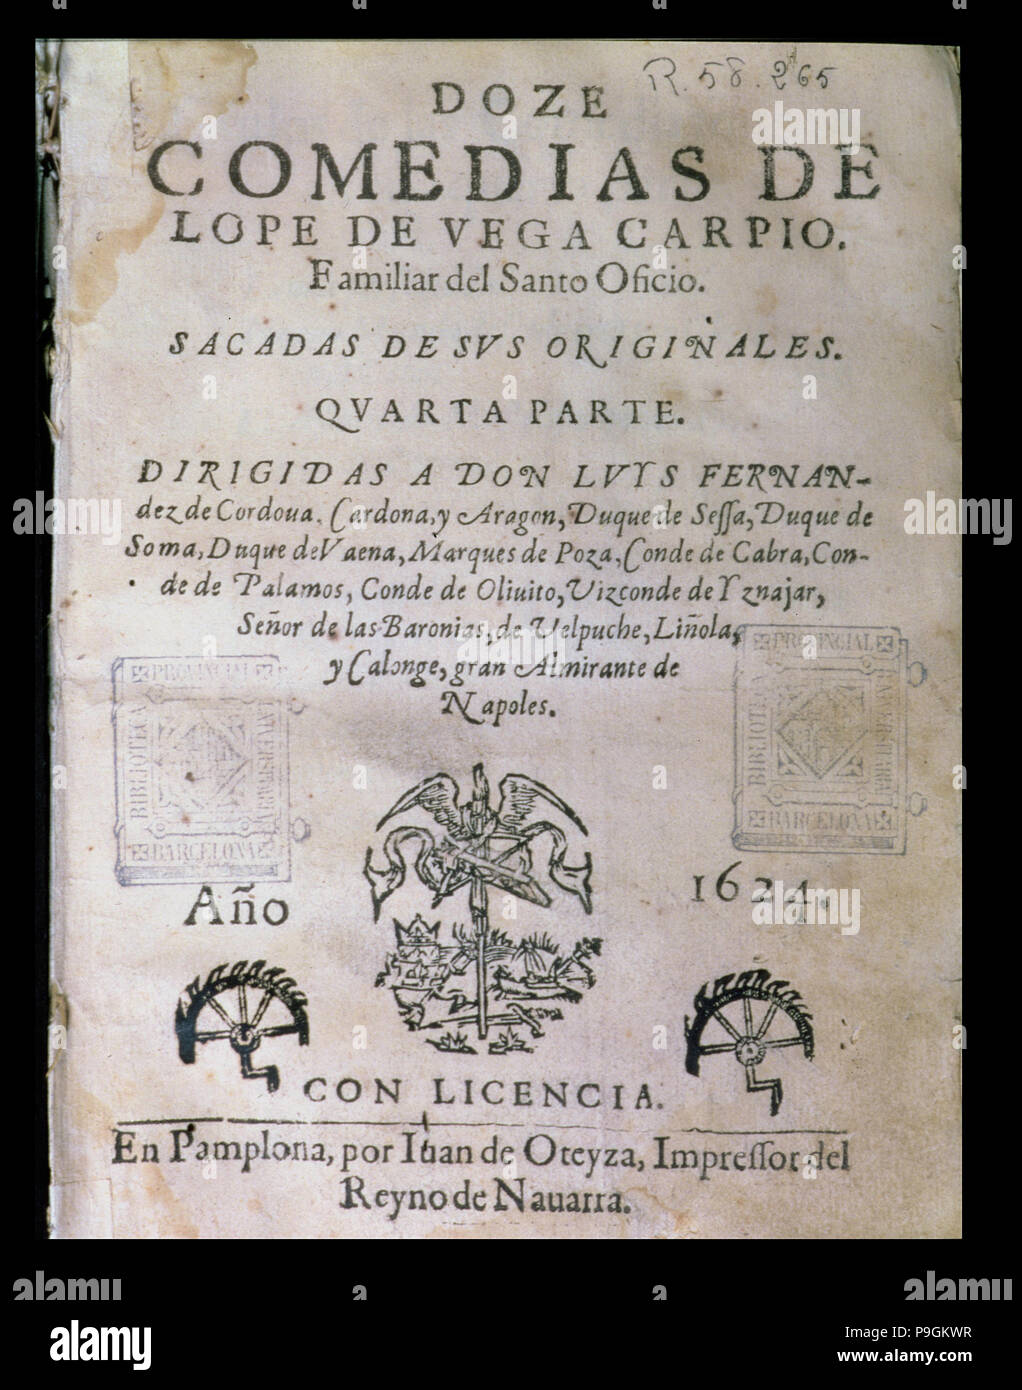 Cover 'Doce comedias' (Twelve comedies) by Lope de Vega, published in 1624 in Pamplona. Stock Photo